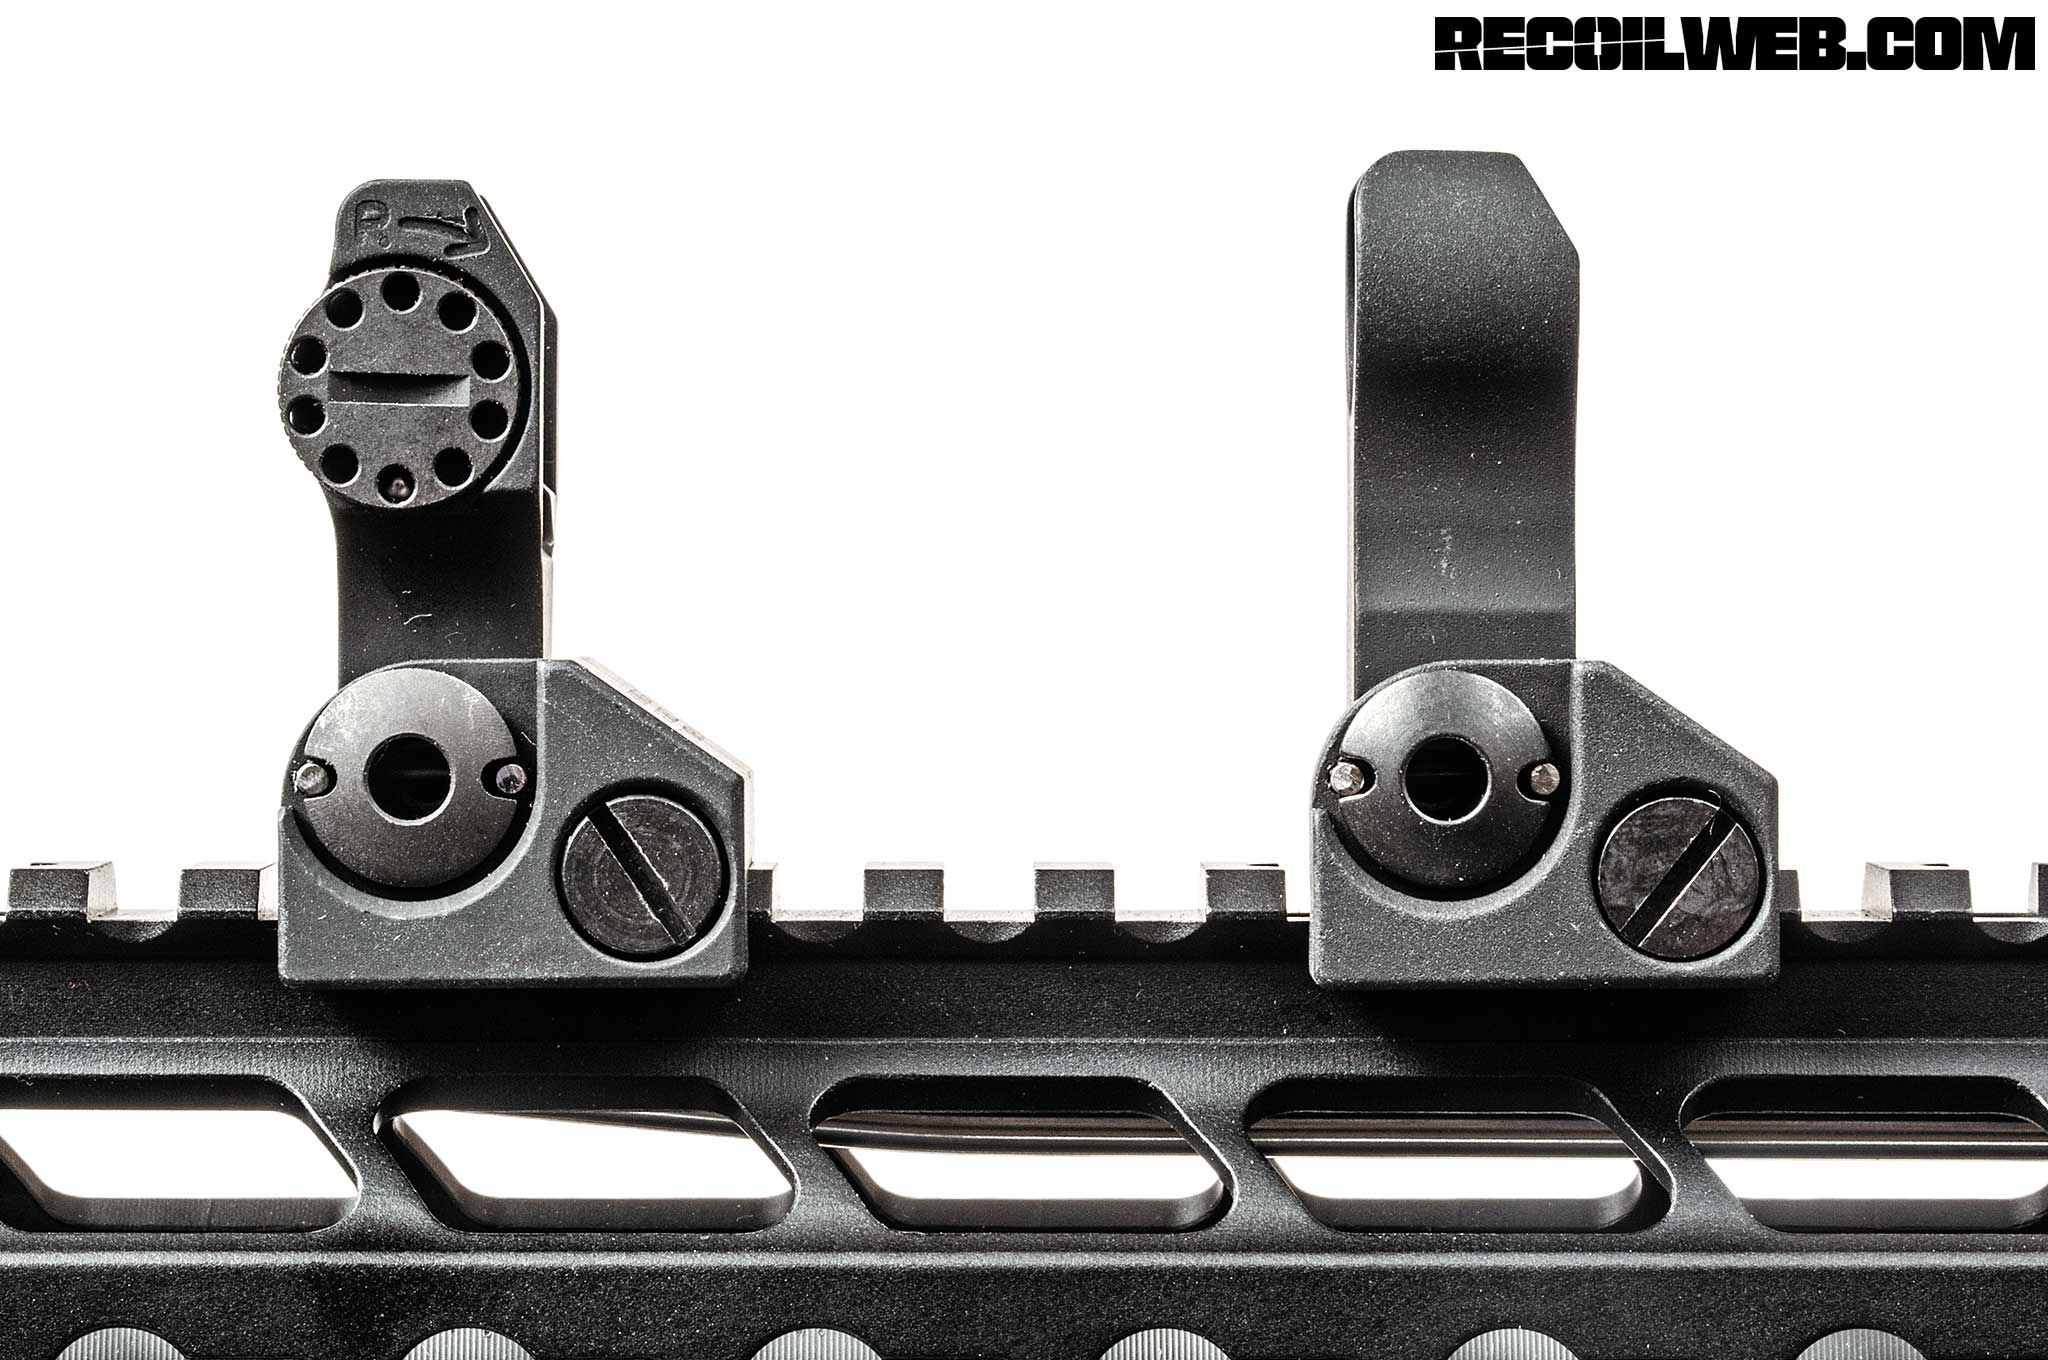 back-up-iron-sights-buyers-guide-troy-industries-folding-battle-sight-001.